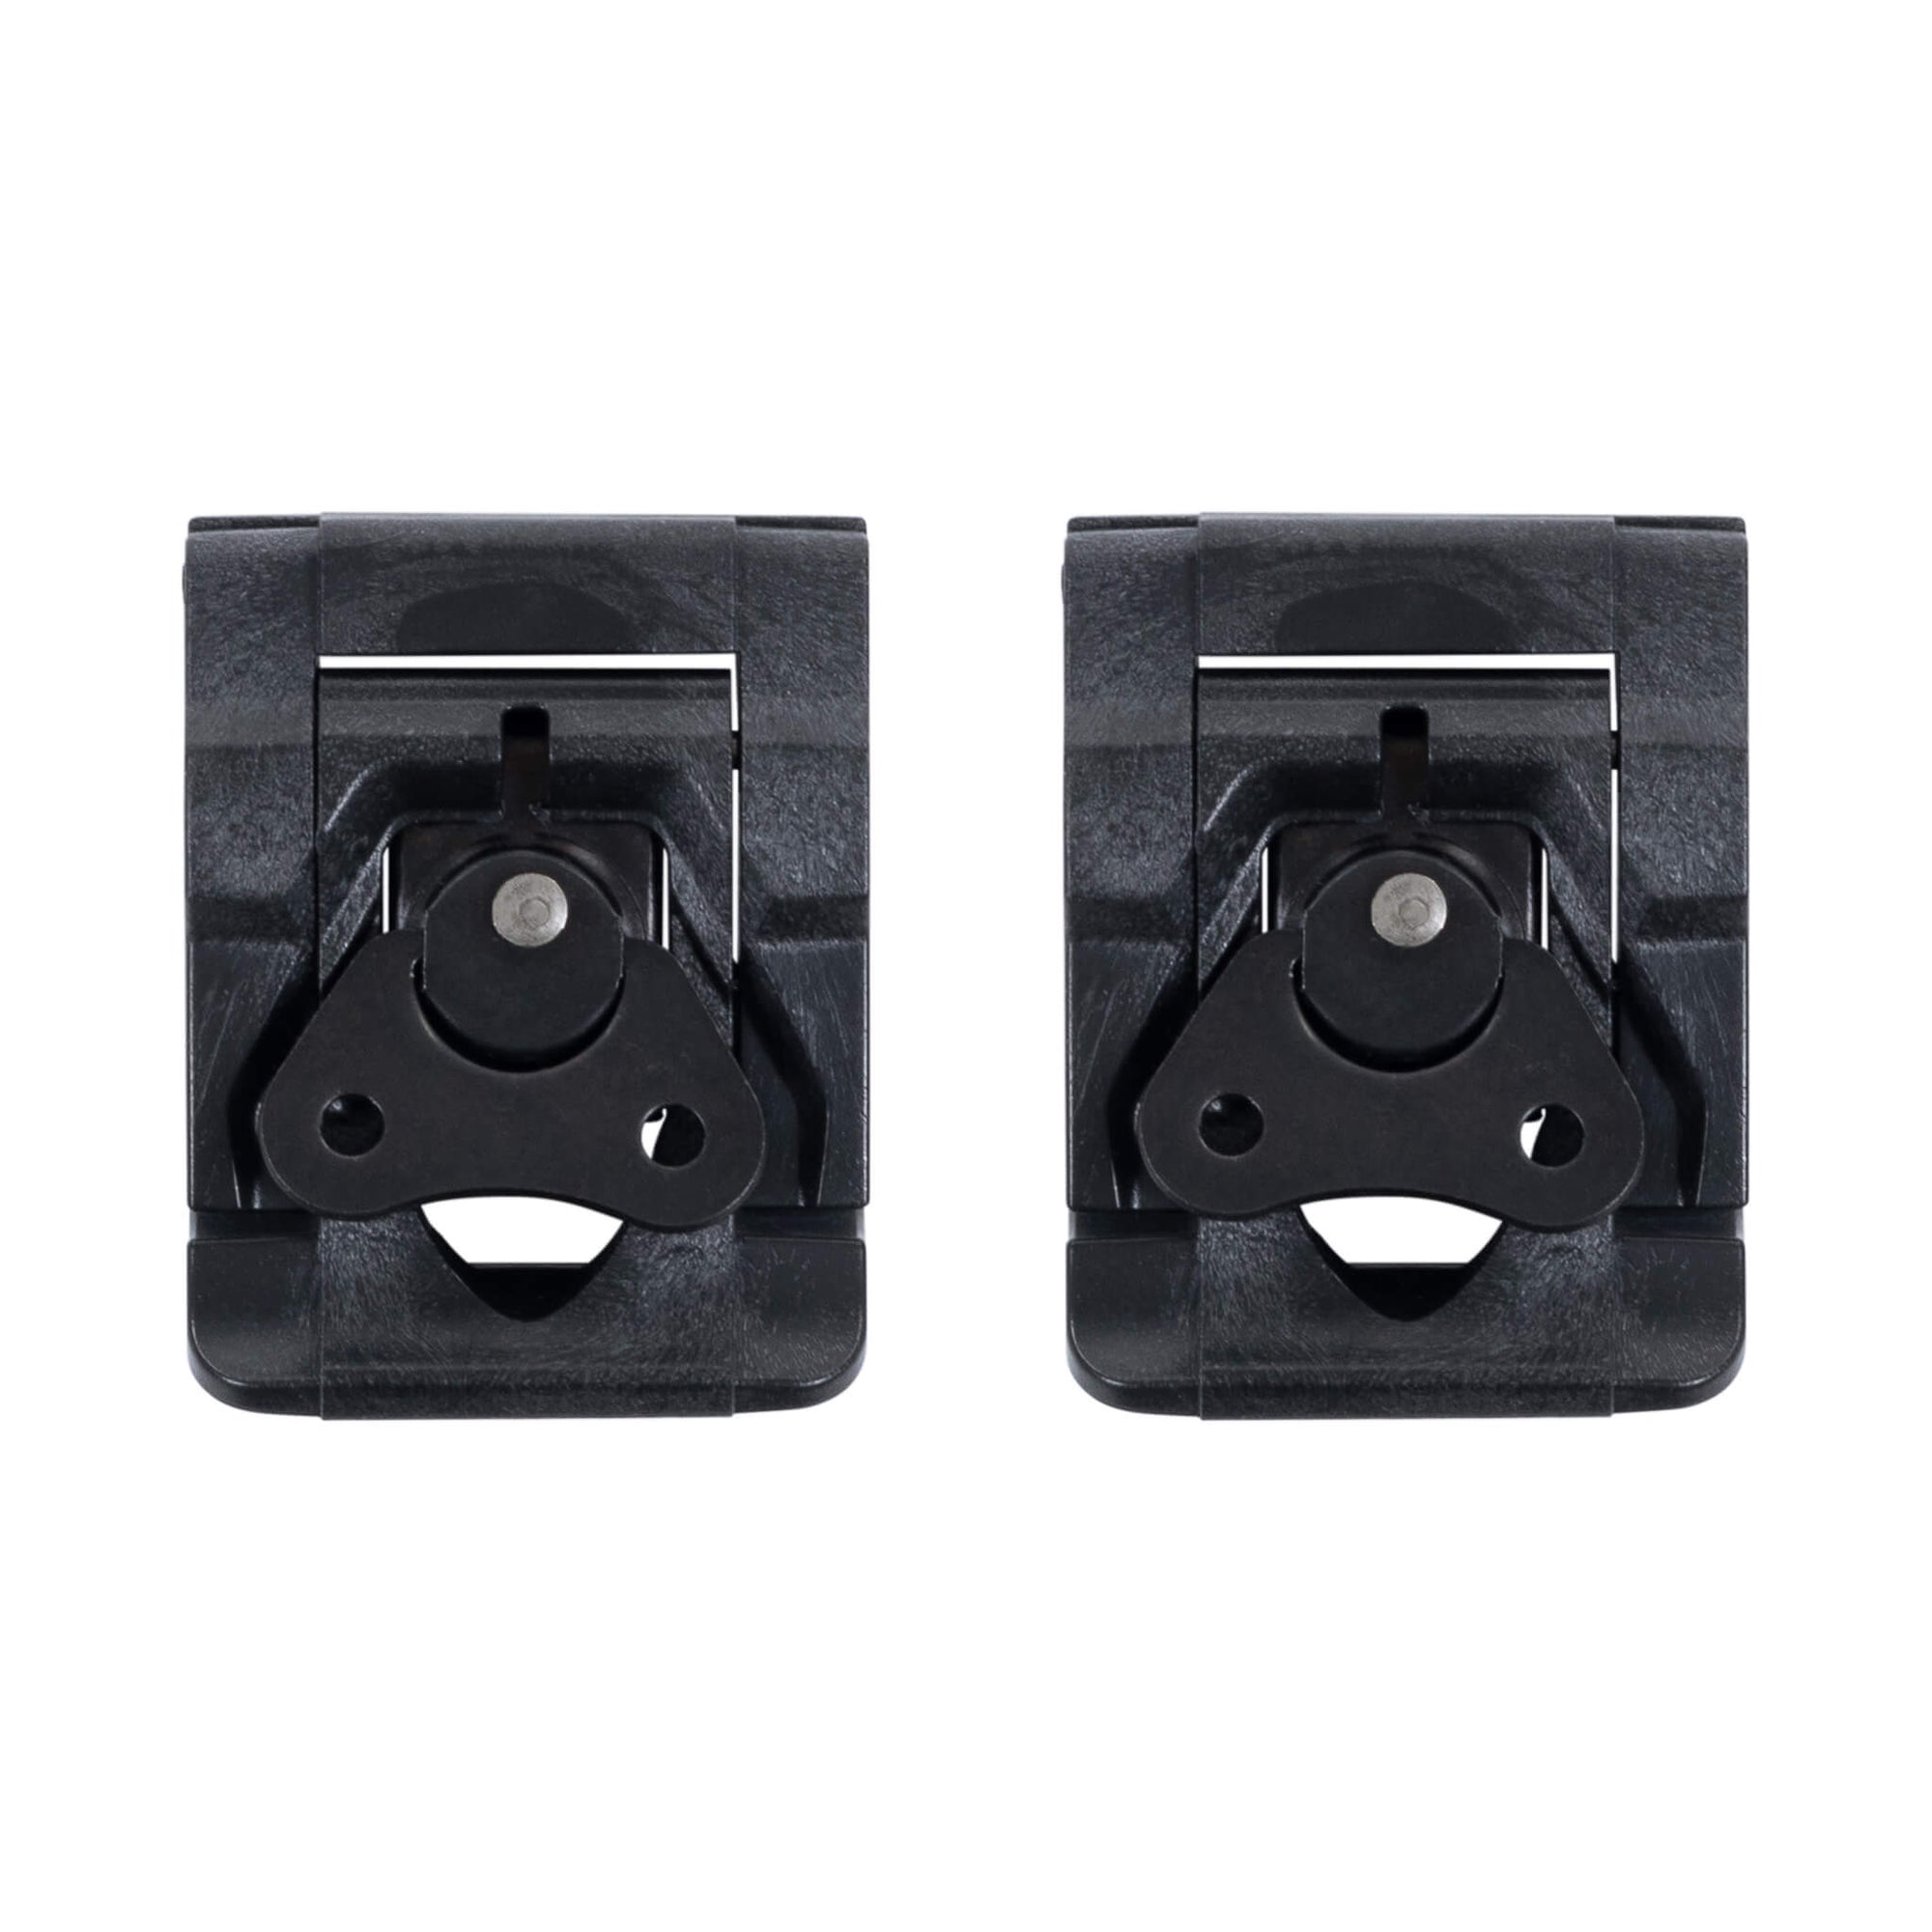 Pelican 0450 Replacement Butterfly Locking Latches, Black (Set of 2) ColorCase 